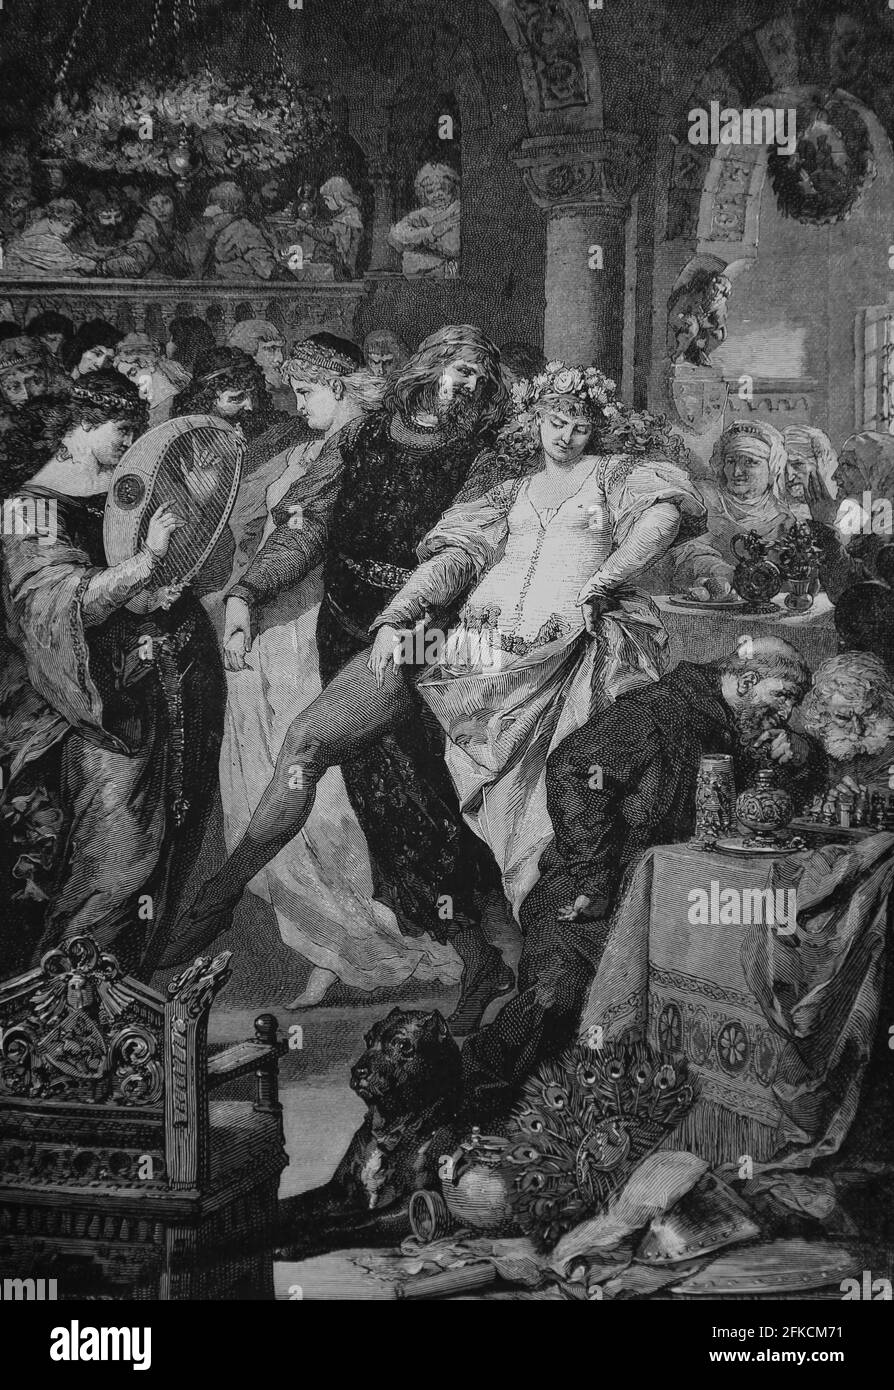 Middle Ages. Courtly dance. Private Collection. Germania, 1882. Juan Scherr Stock Photo